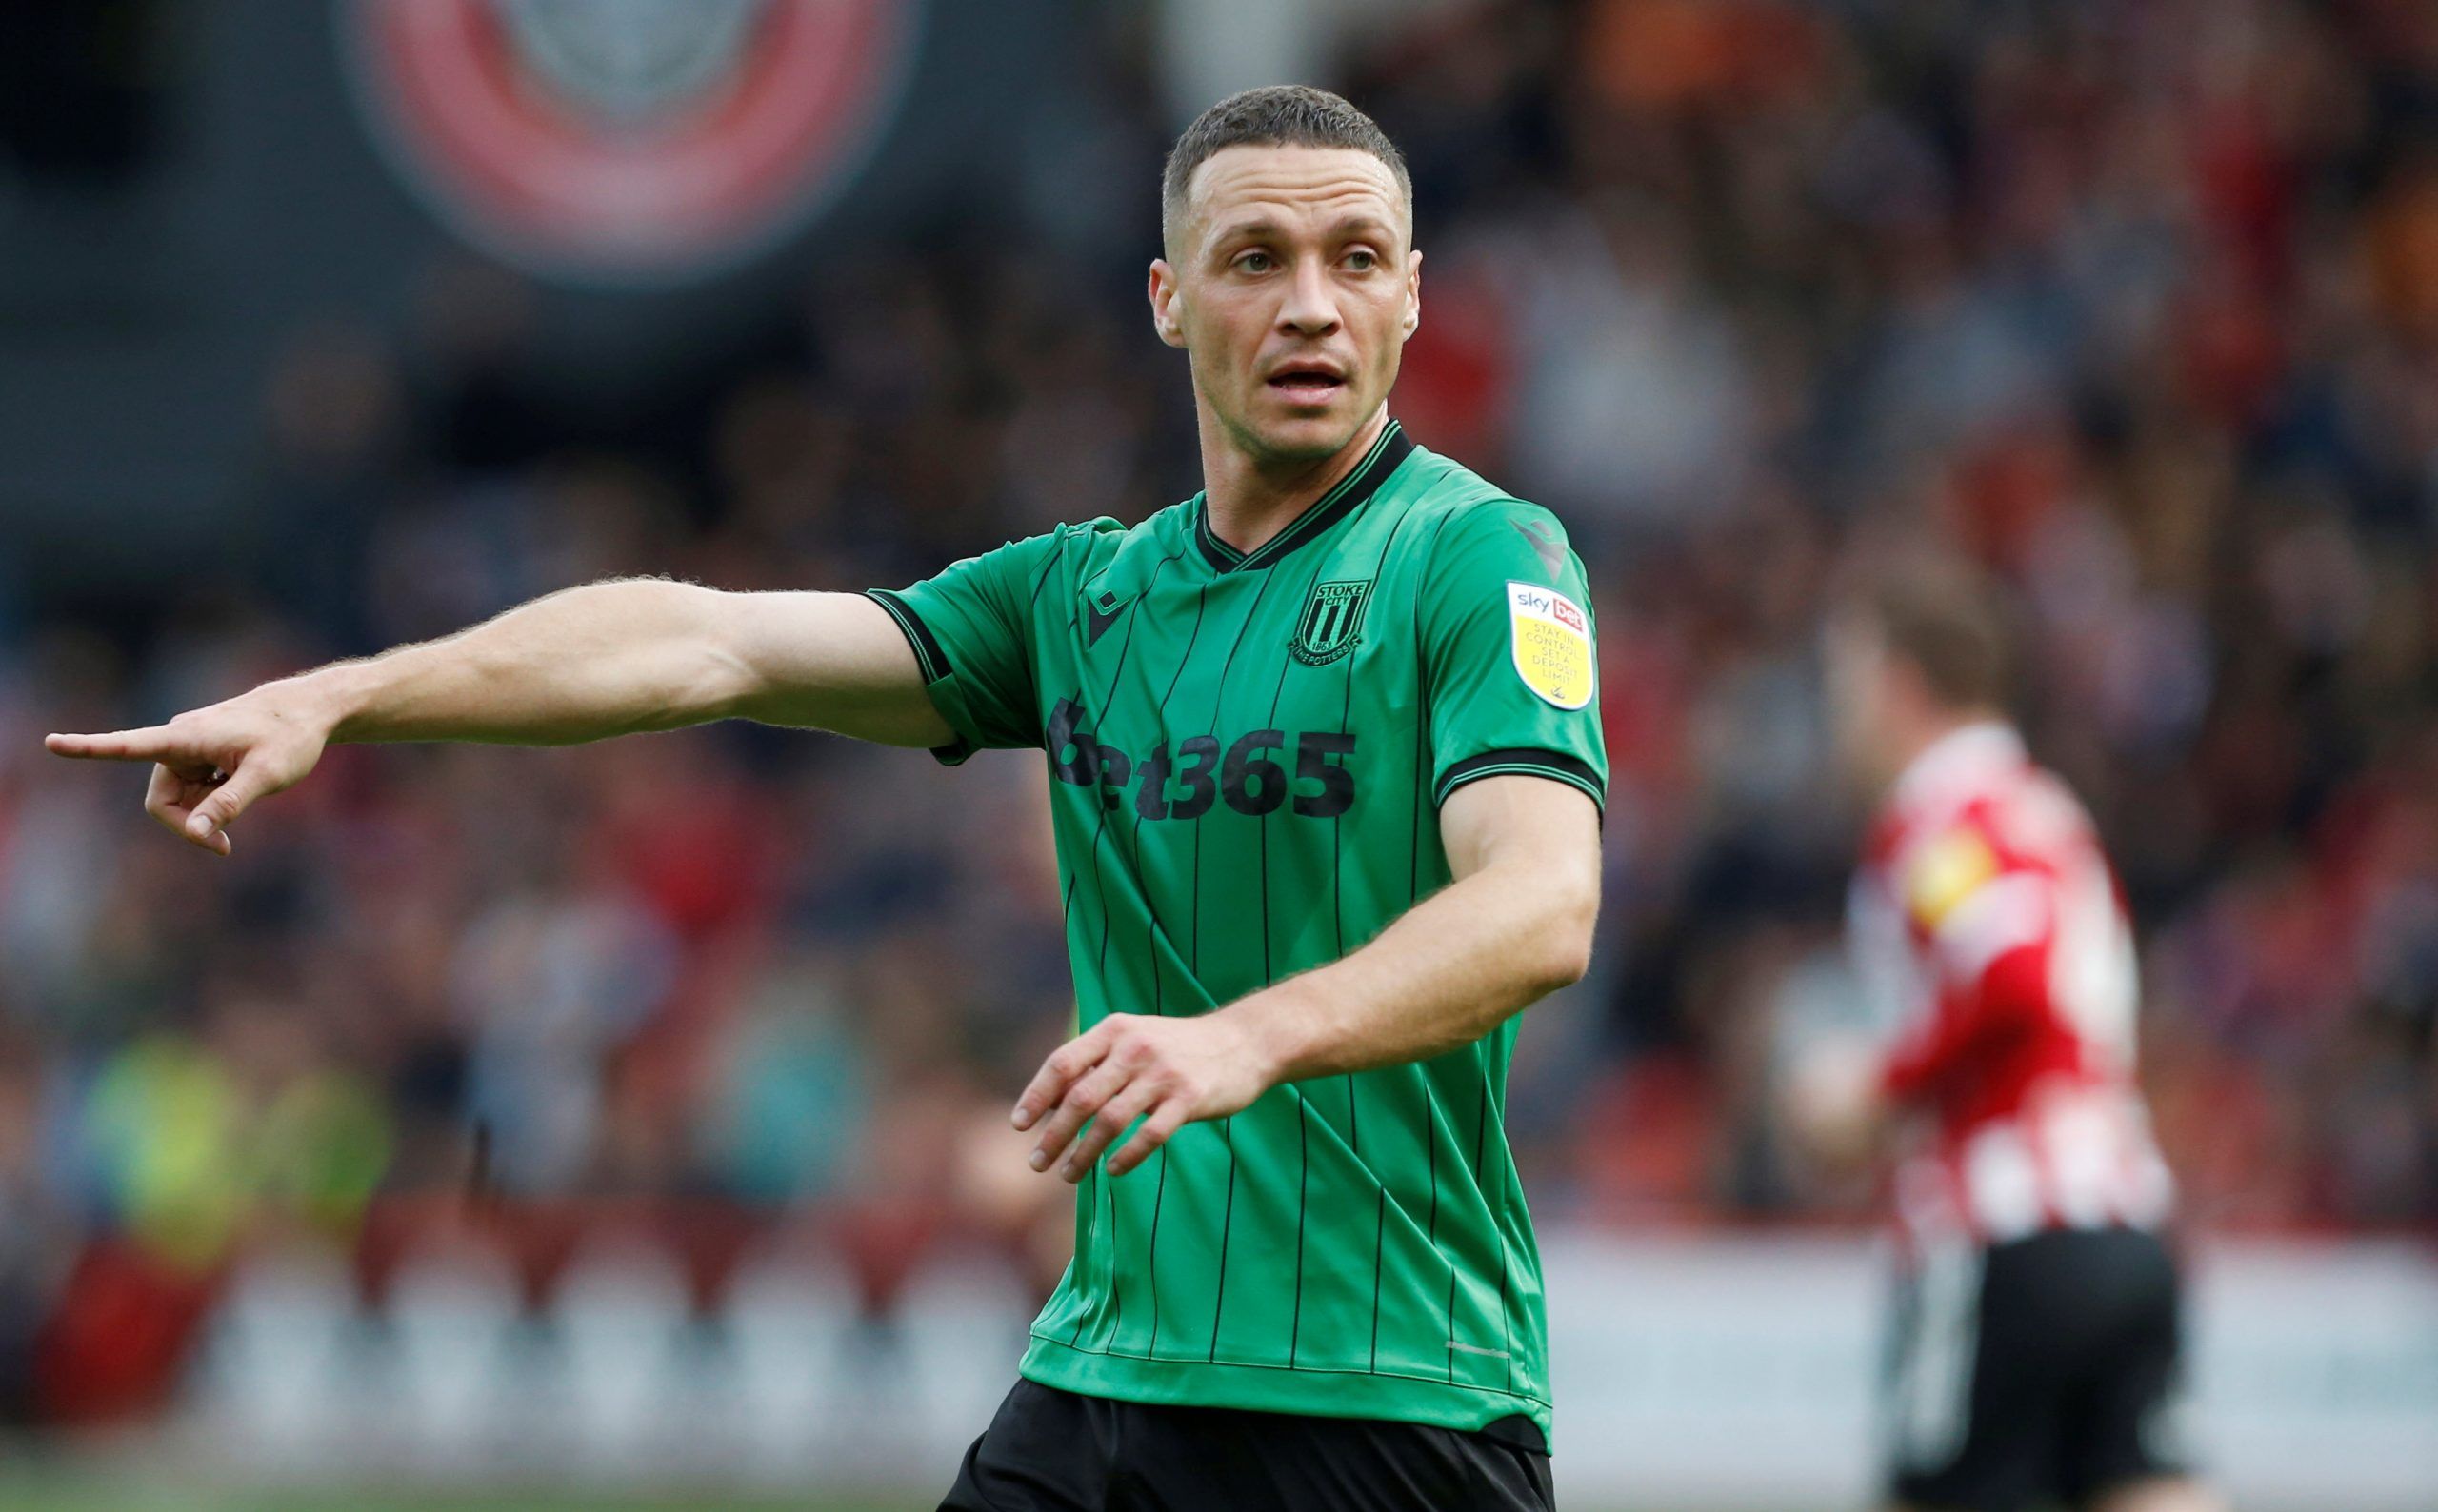 Soccer Football - Championship - Sheffield United v Stoke City - Bramall Lane, Sheffield, Britain - October 16, 2021 Stoke City's James Chester  Action Images/Craig Brough  EDITORIAL USE ONLY. No use with unauthorized audio, video, data, fixture lists, club/league logos or 